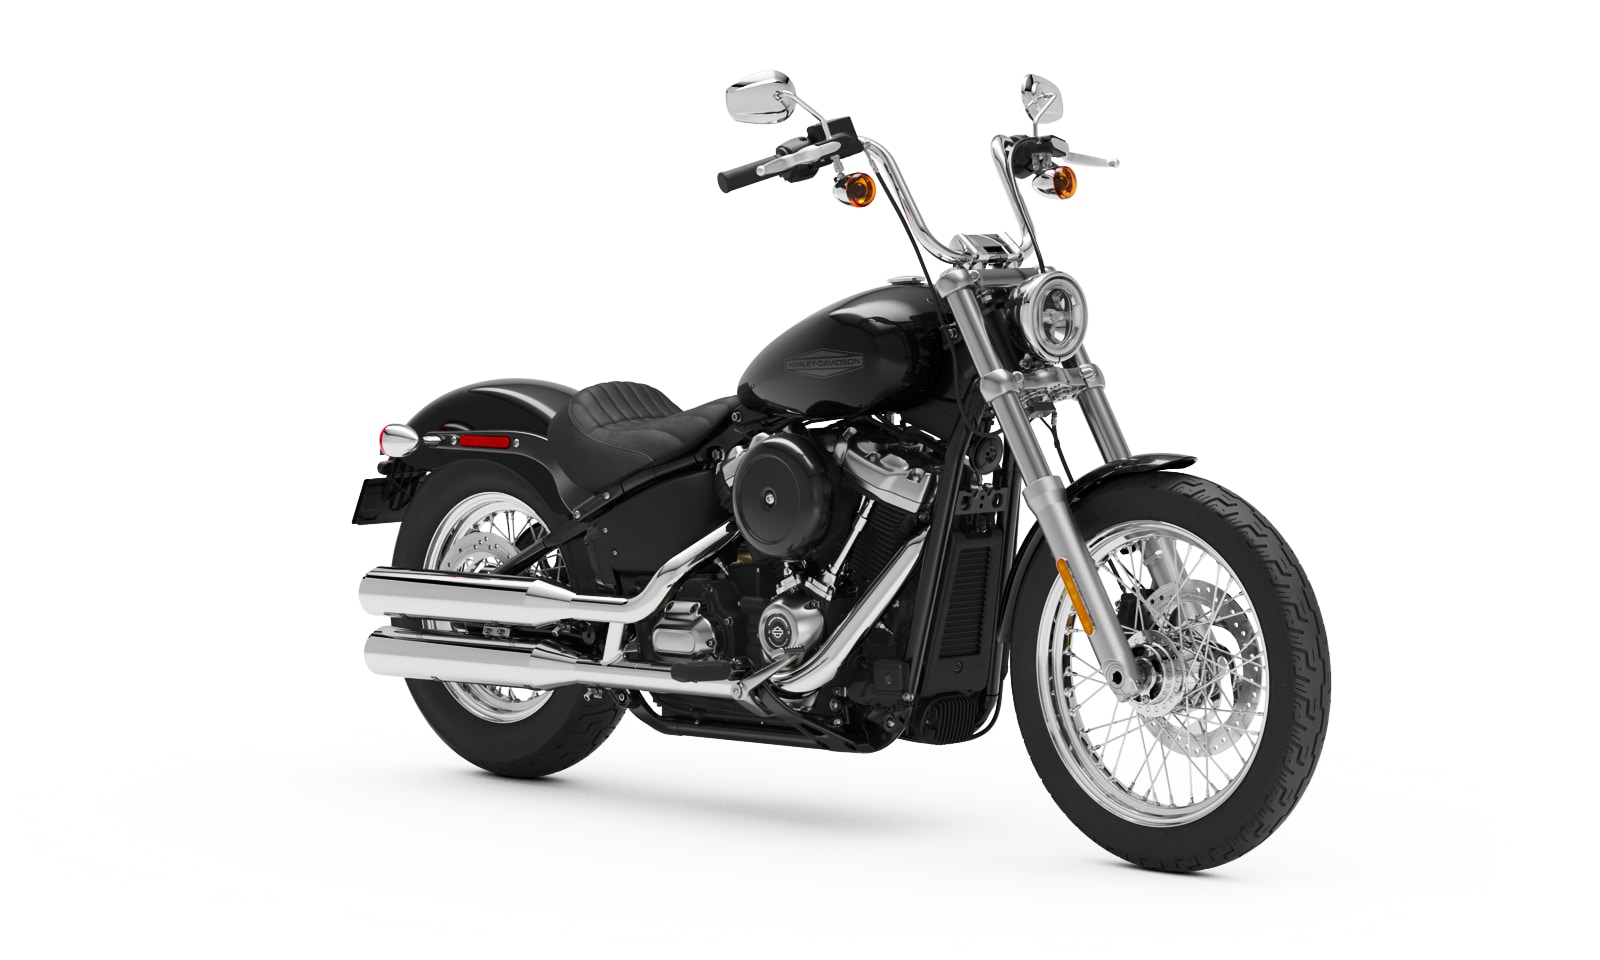 A side view of the 2021 Harley-Davidson Softail